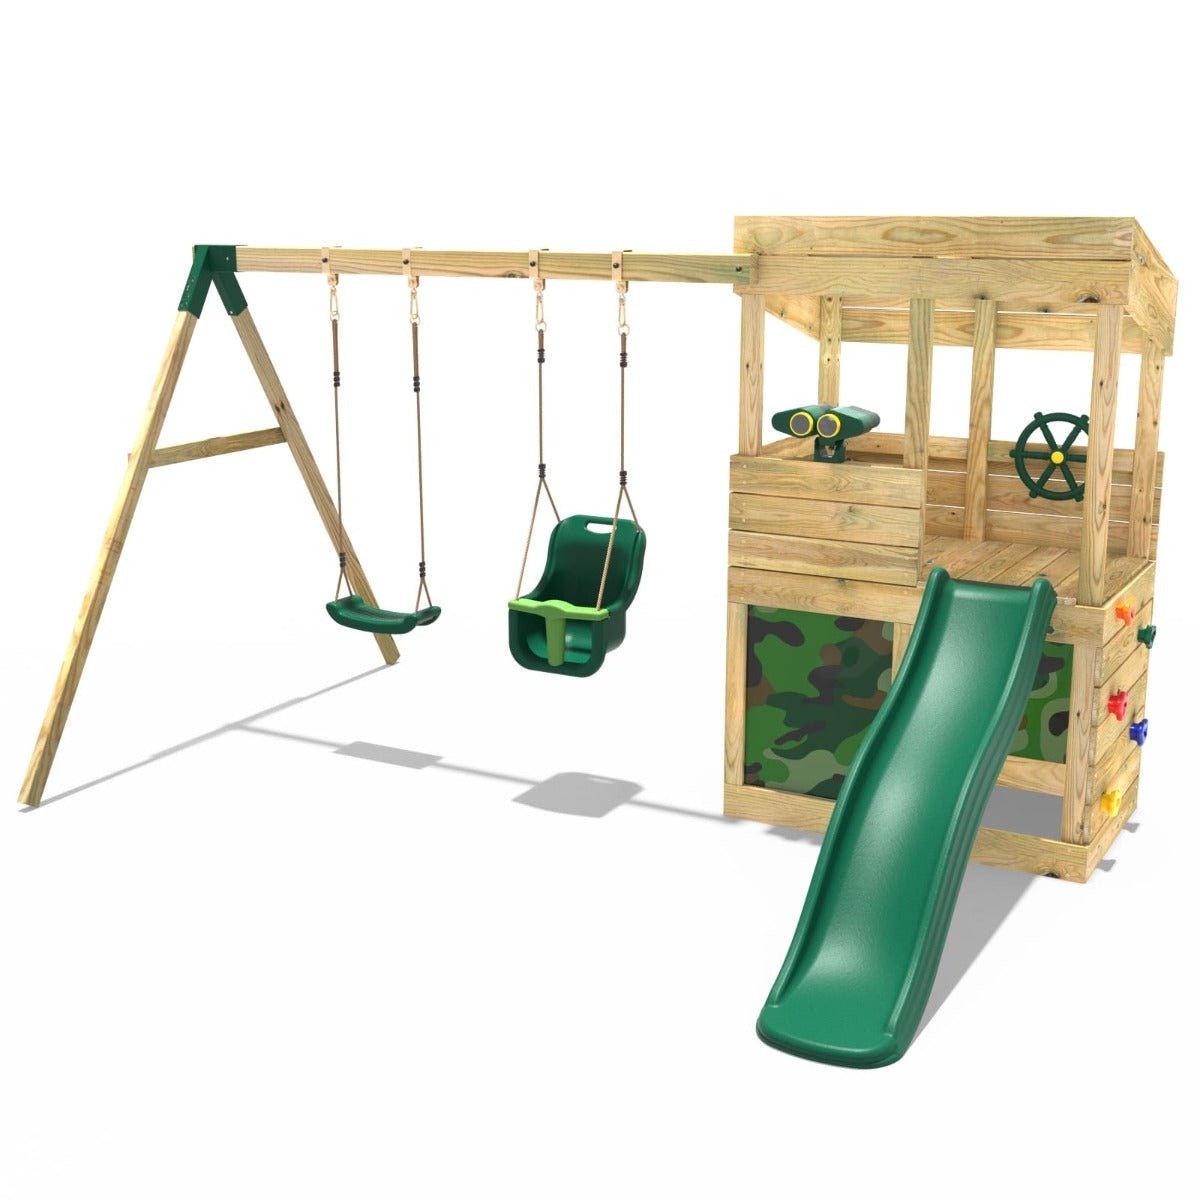 Rebo Wooden Lookout Tower Playhouse with 6ft Slide & Swing - Zion Camouflage